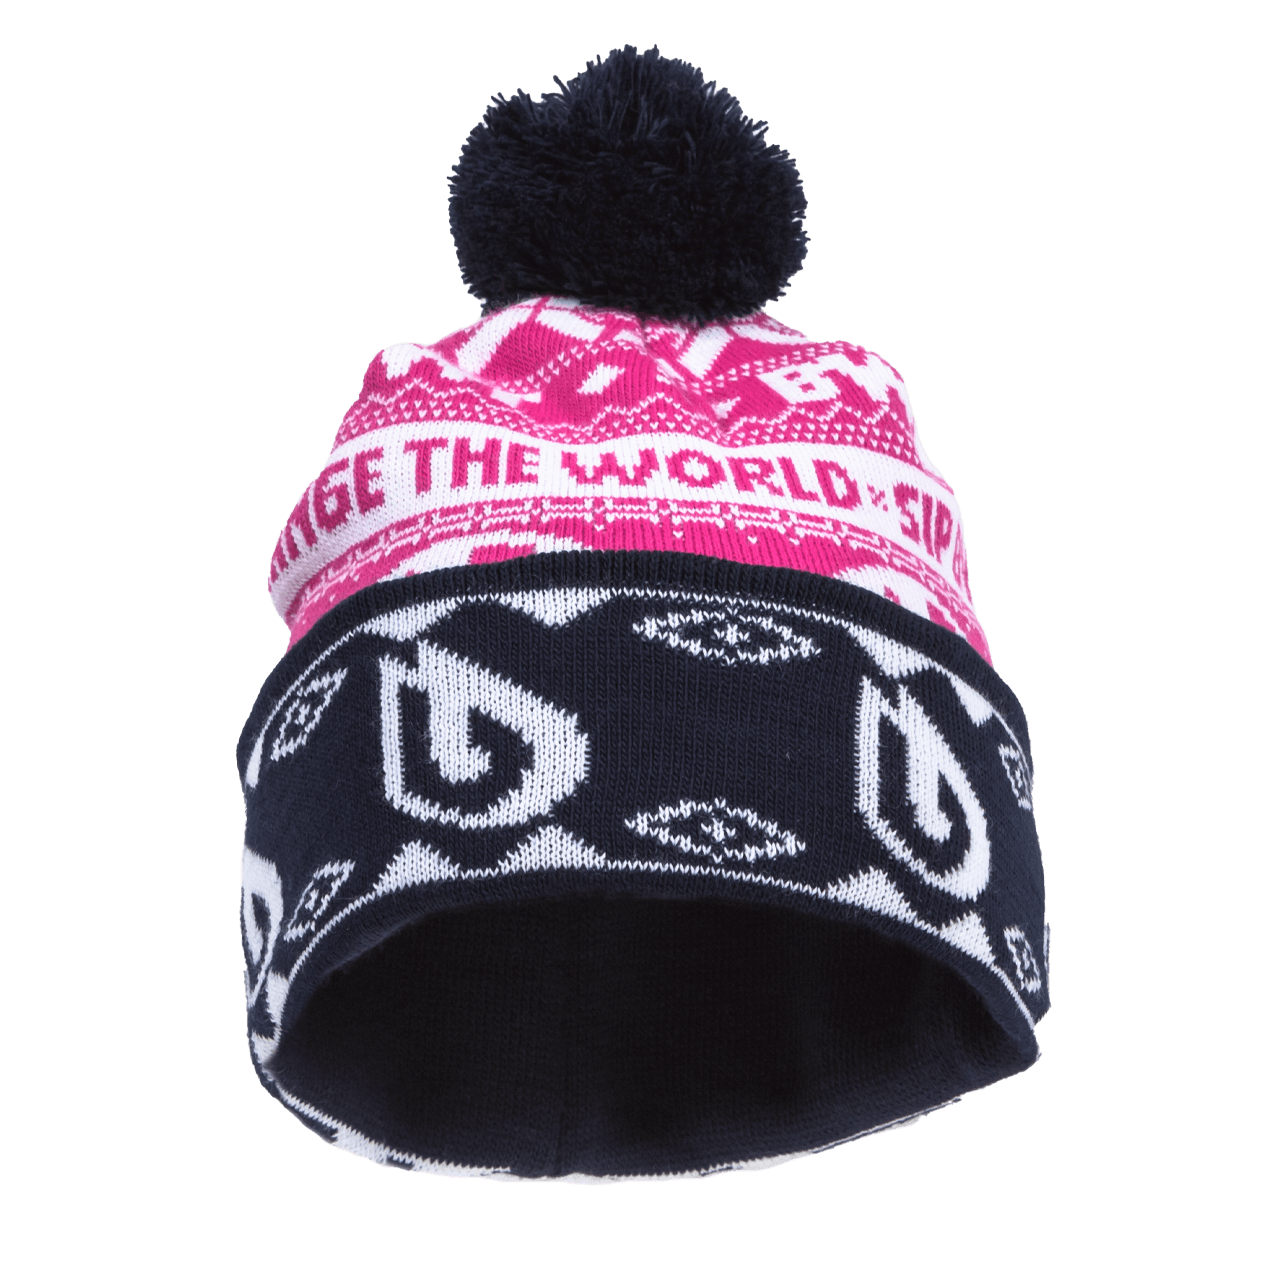 BWT winter hat in pink/black with "Change the World" lettering